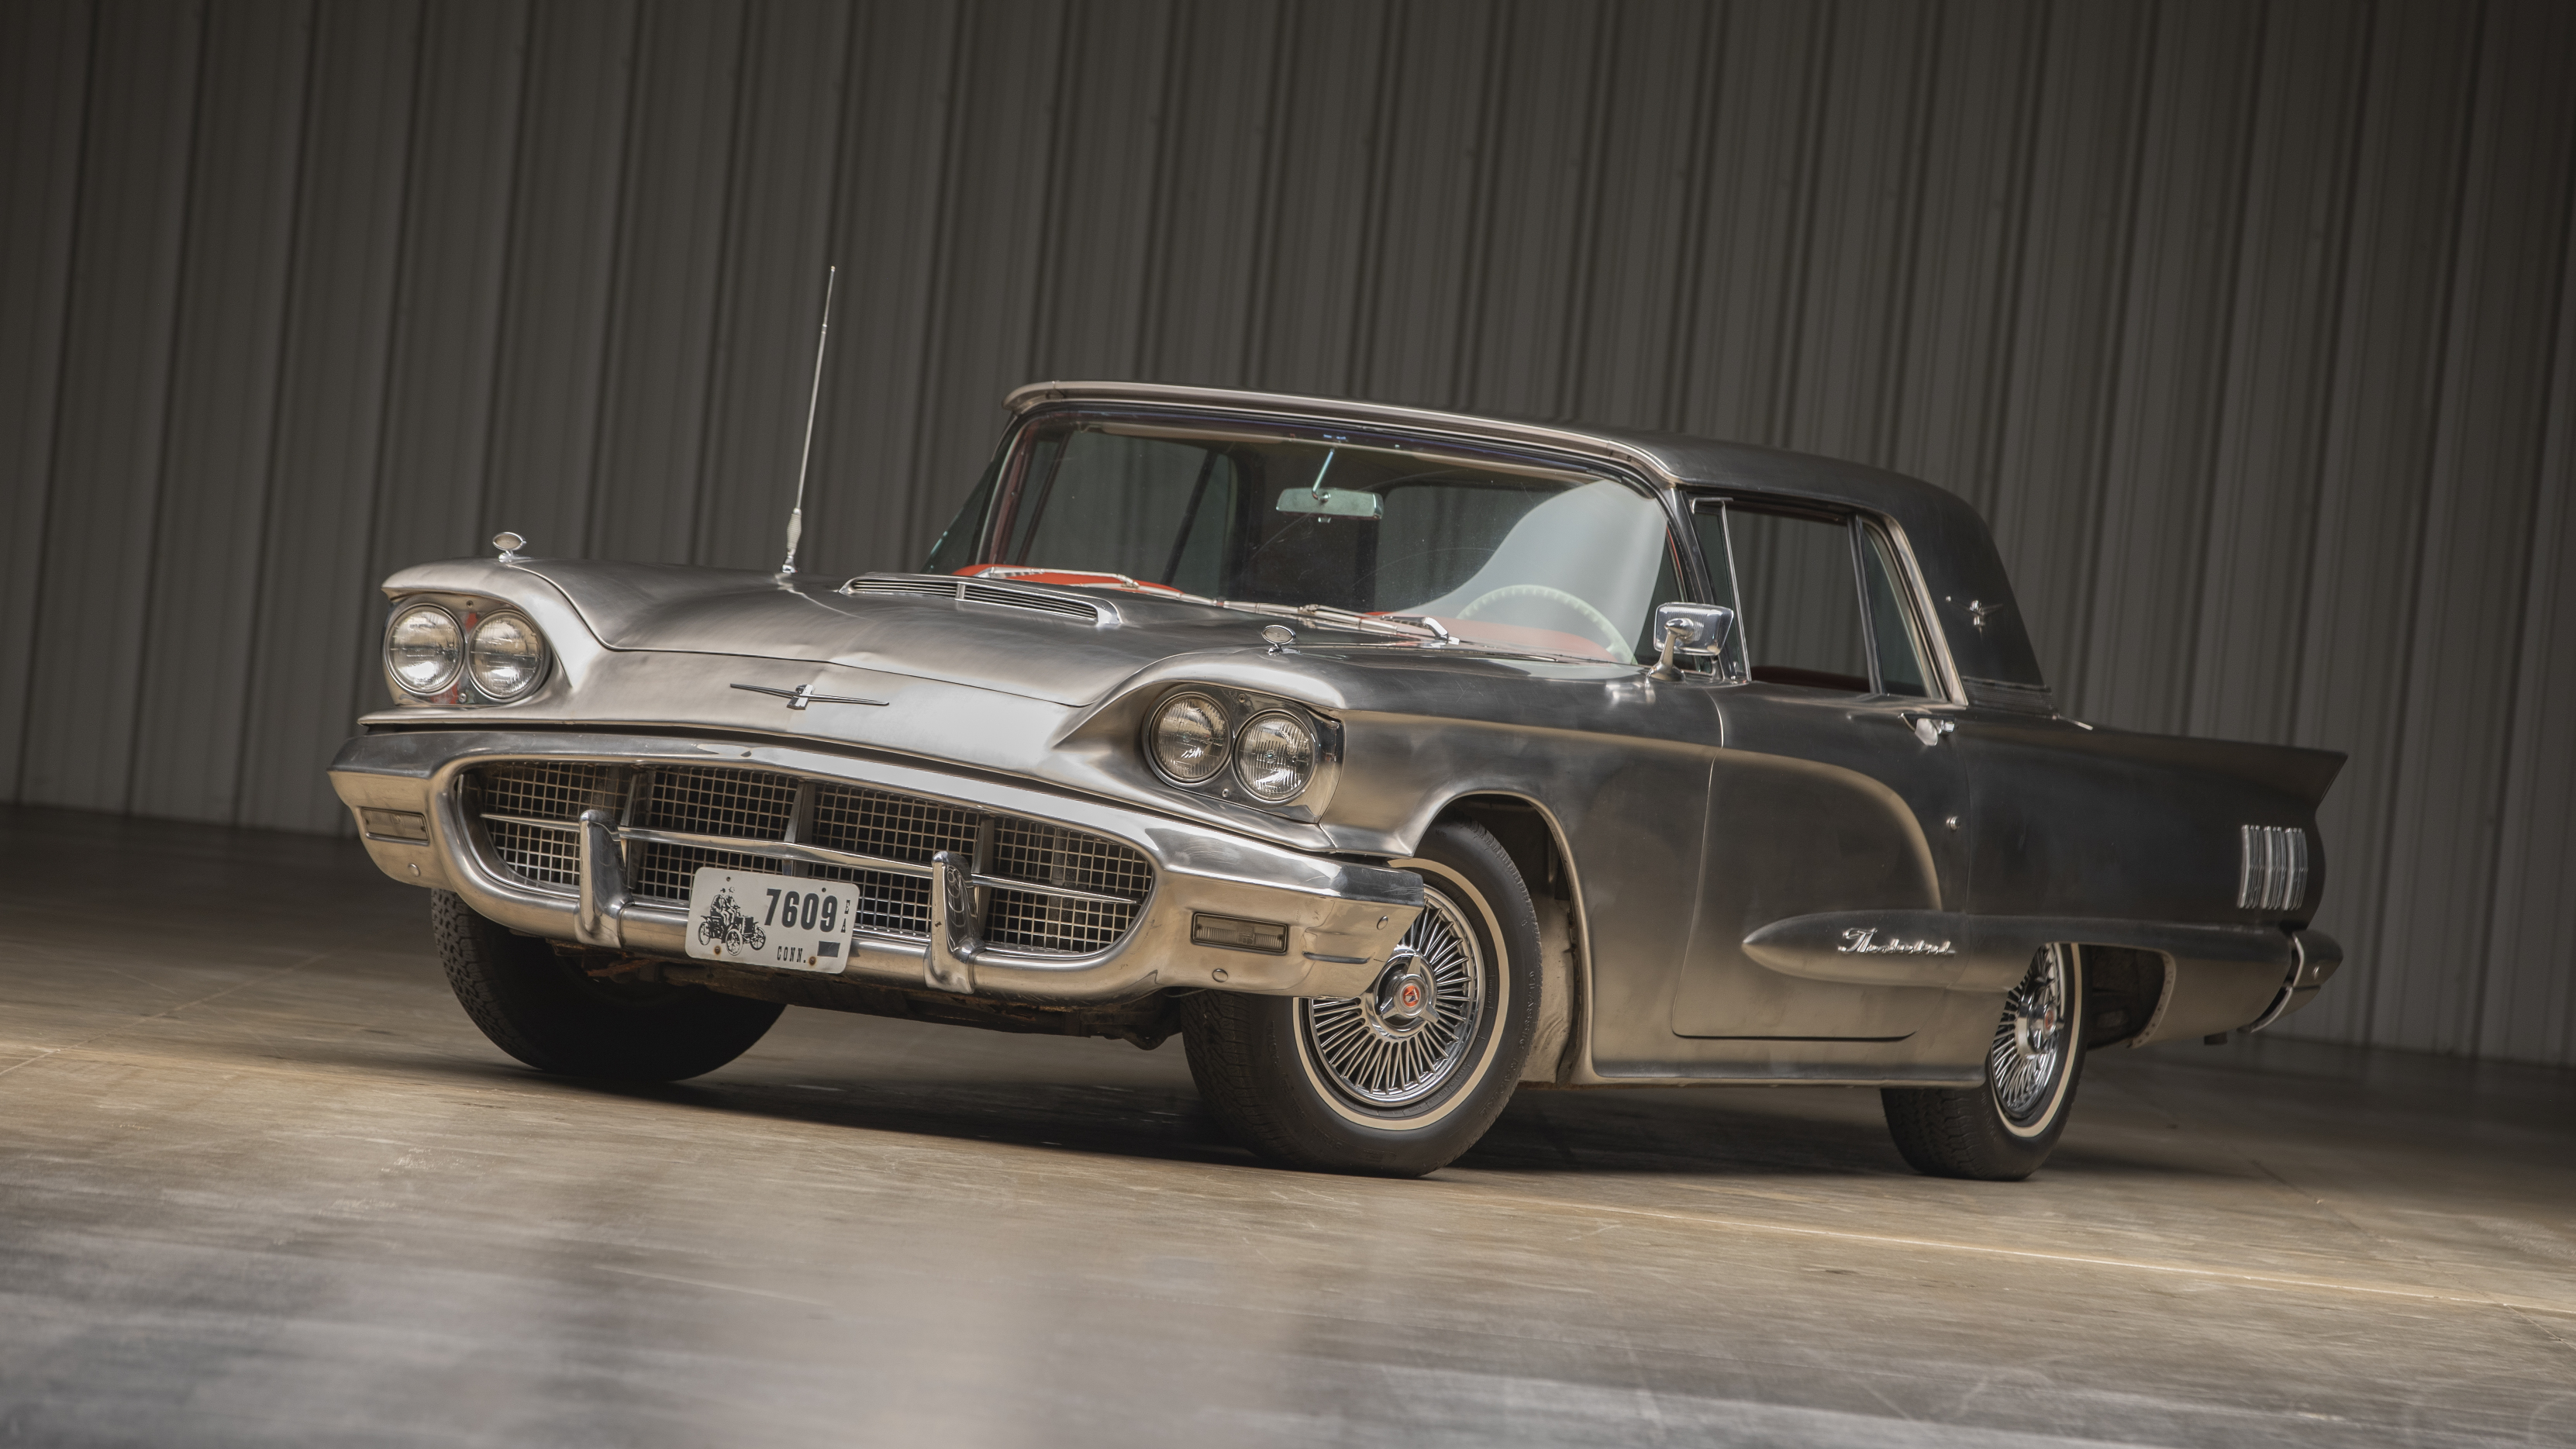 1960 Stainless Steel Ford Thunderbird- Side View